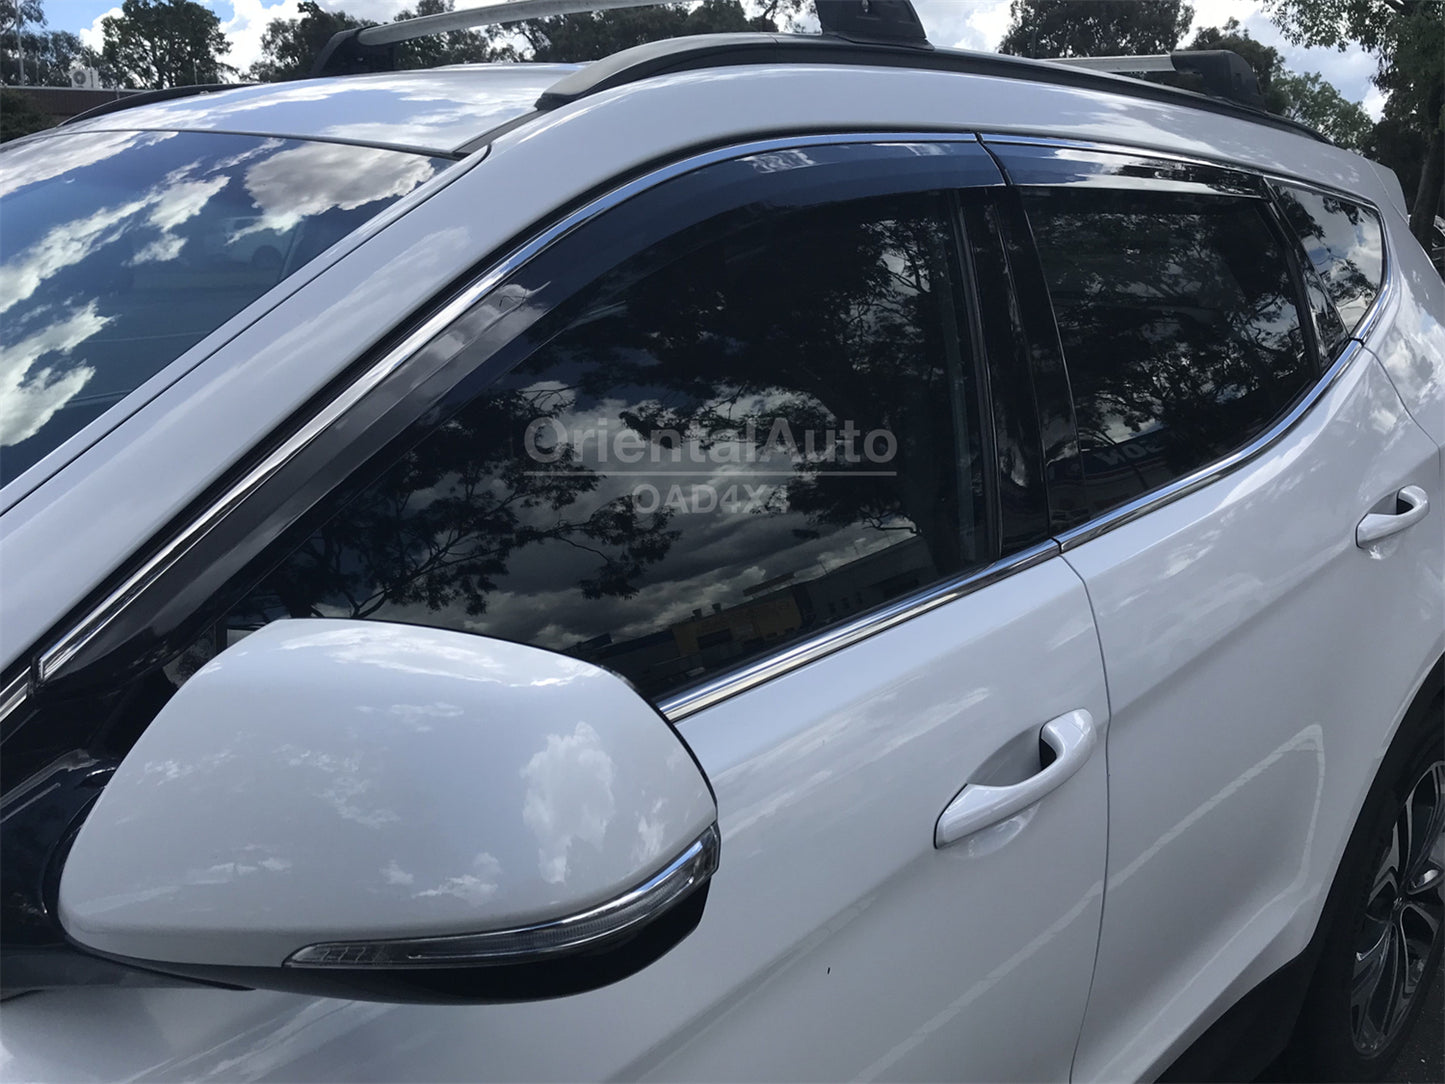 Pre-order Injection Stainless Weathershields For Hyundai Santa Fe DM Series 2012-2018